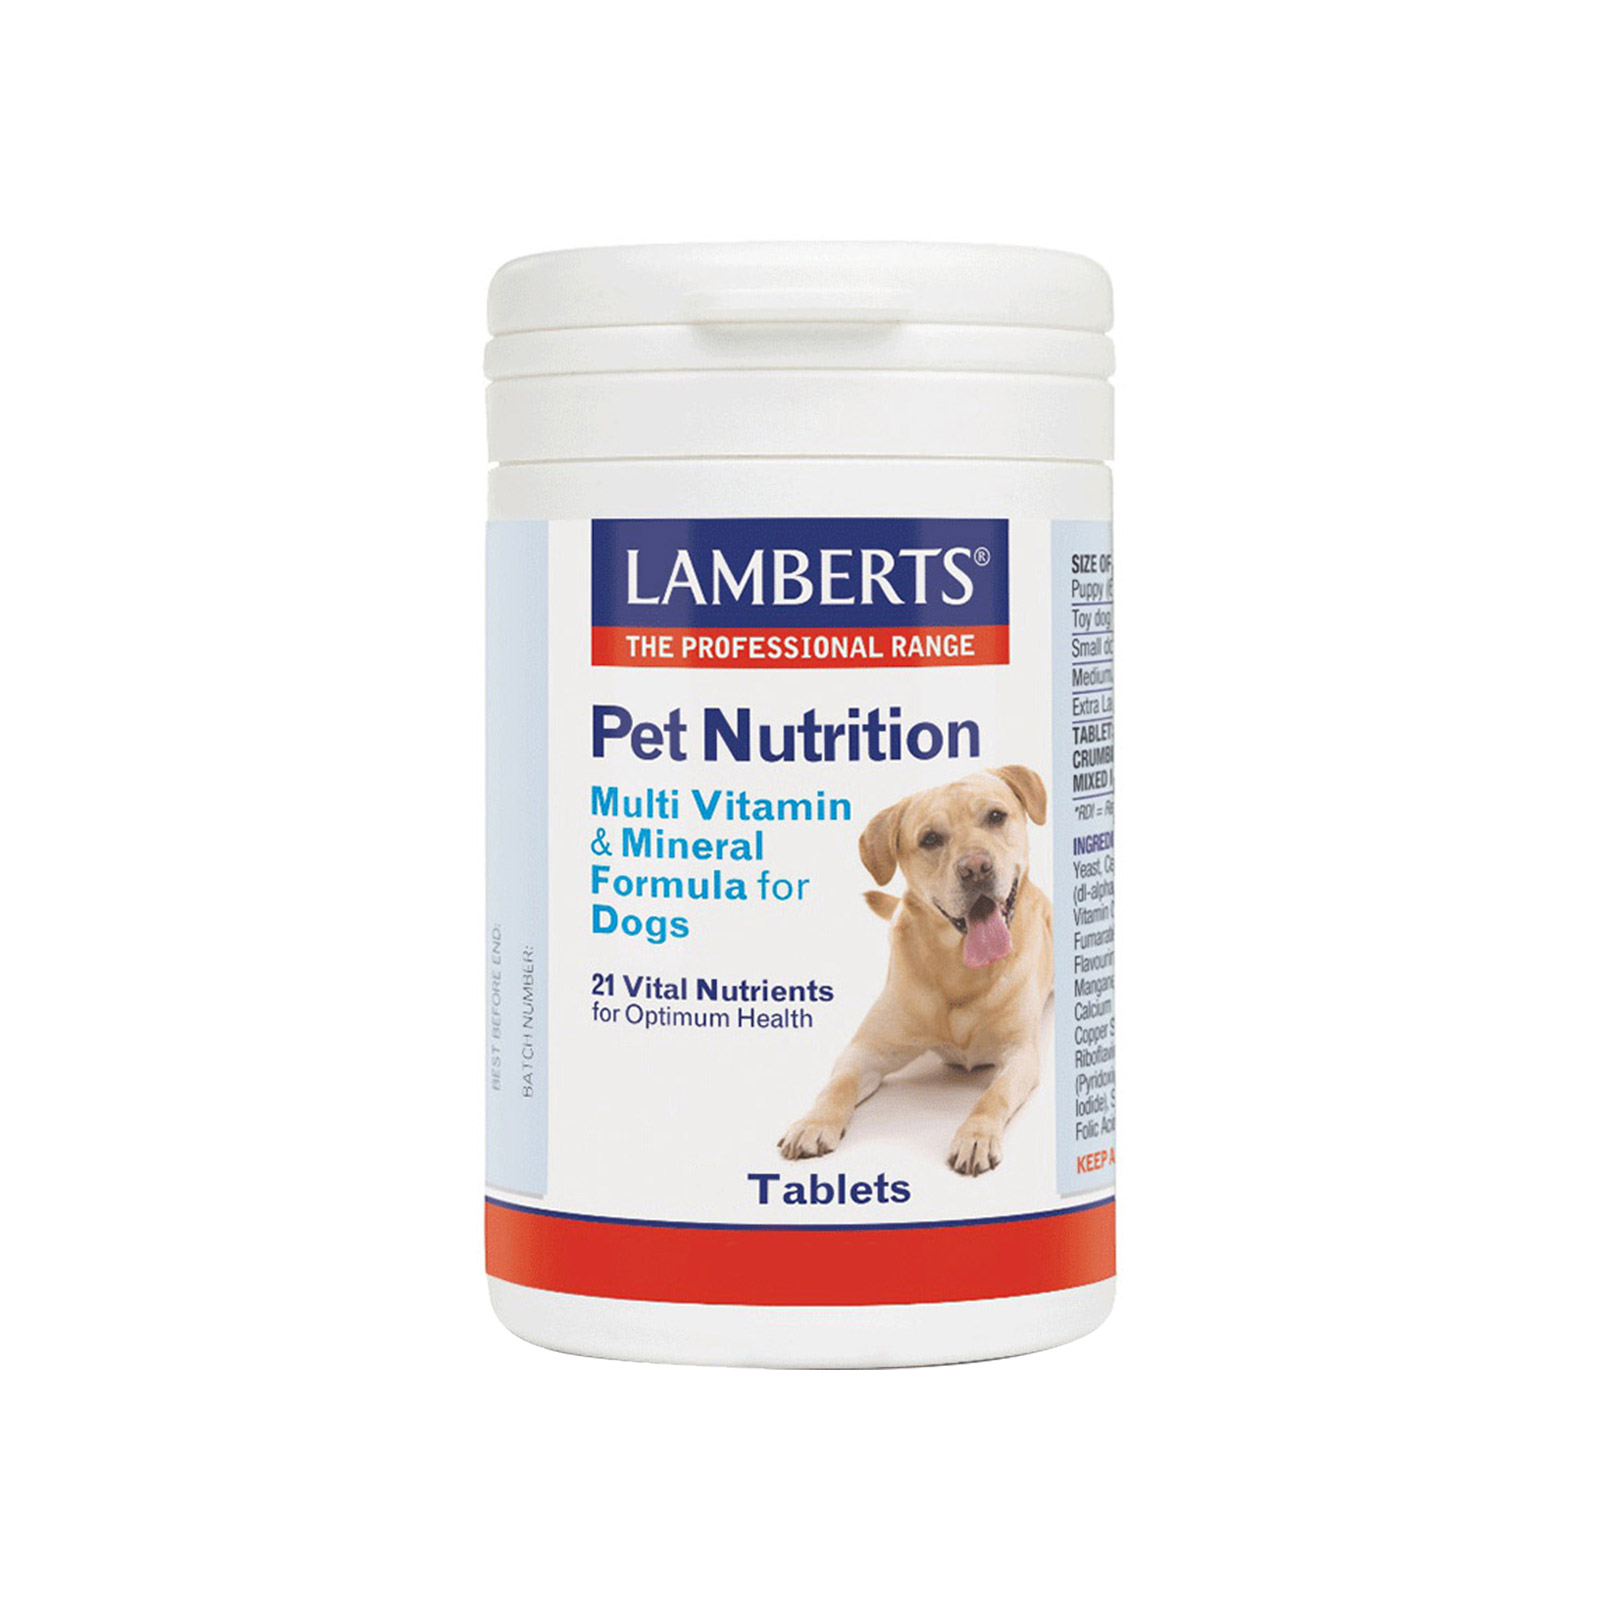 Lamberts Multi Vitamin And Mineral For Dogs 90 Tablets
